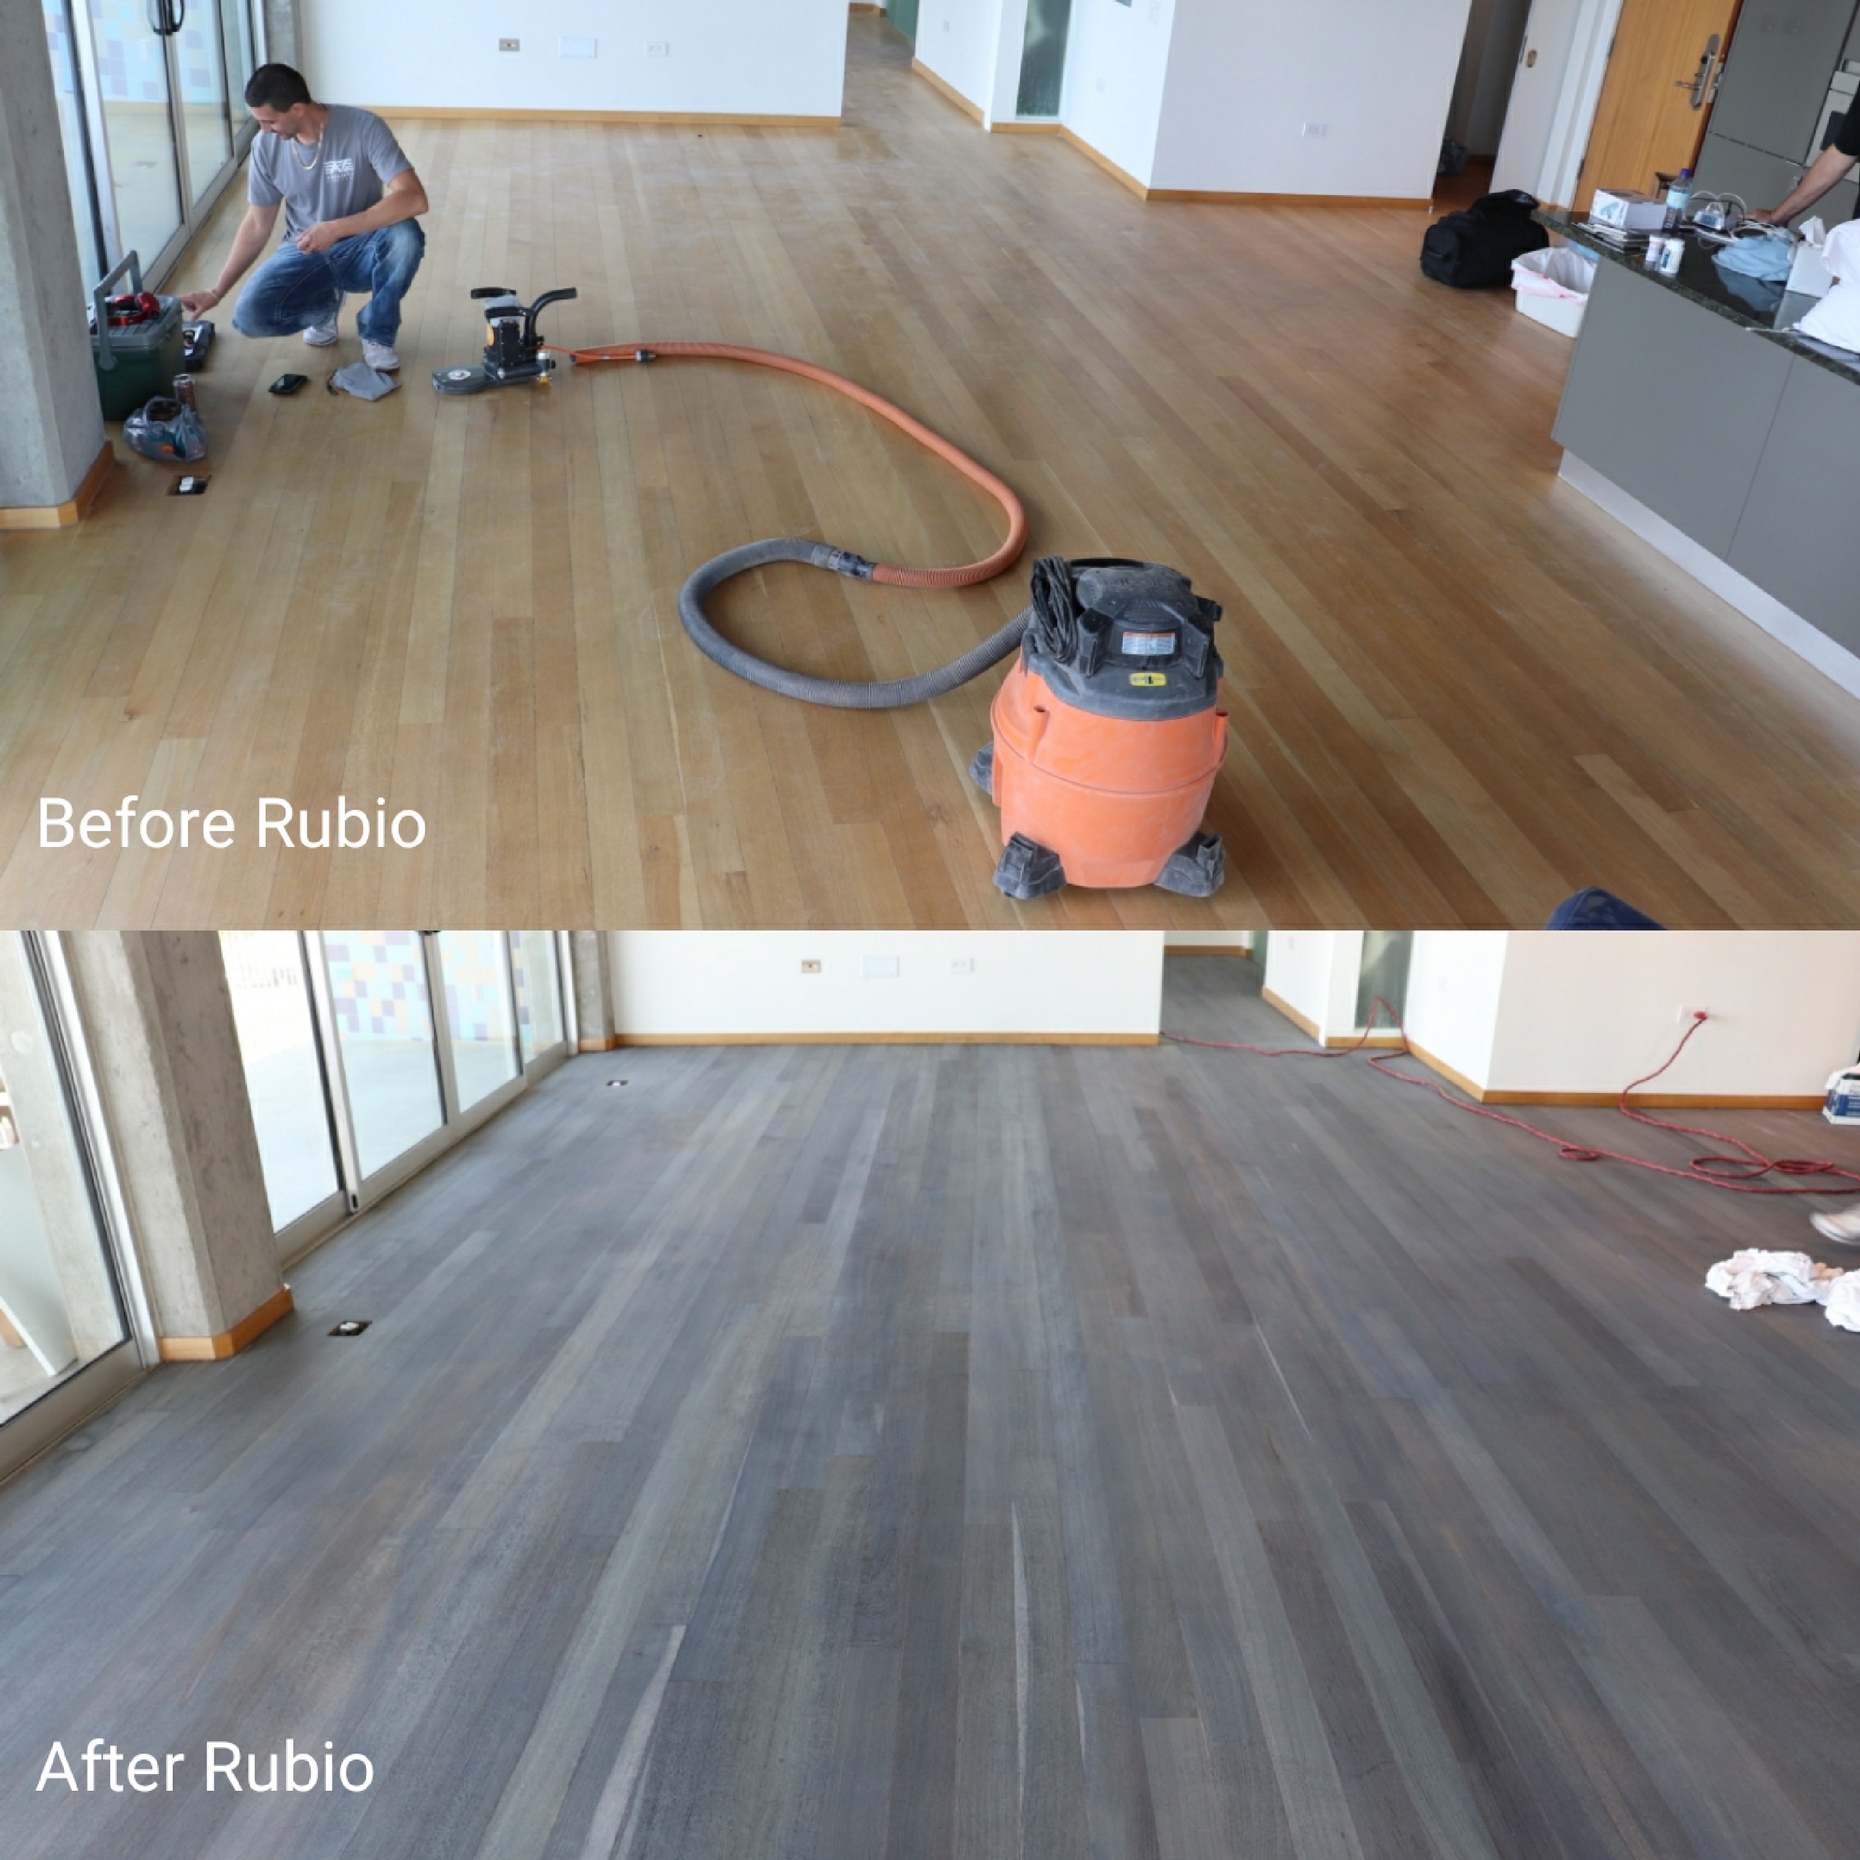 Before and after Rubio Monocoat Application